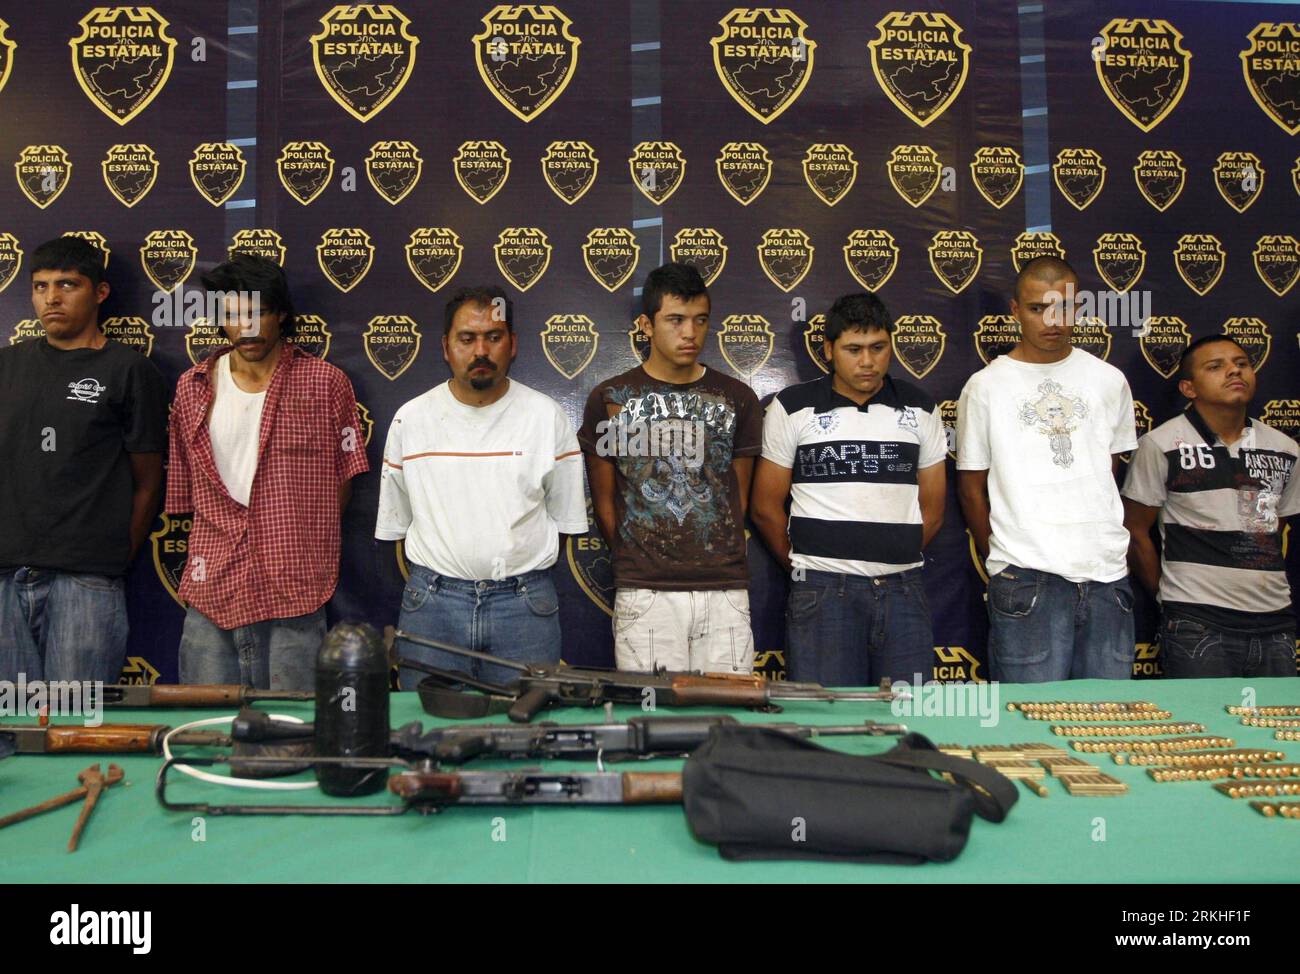 Bildnummer: 55818824  Datum: 23.08.2011  Copyright: imago/Xinhua (110824) -- GUADALAJARA, Aug. 24, 2011 (Xinhua) -- Alleged memebers of Los Zetas drug cartel are presented to the media in Guadalajara, Mexico, on Aug. 23, 2011. A clash between memebers of the Ministry of Public Security of the State and alleged members of the drug cartel Los Zetas leaves four gunmen dead and one policeman injured, within the limits of Jalisco and Zacatecas. Those under arrest brought with them three AK-47 rifles and six camouflage uniforms. (Xinhua/Xolo) (py) MEXICO-GUADALAJARA-DRUGS-CONFRONTATION PUBLICATIONxN Stock Photo